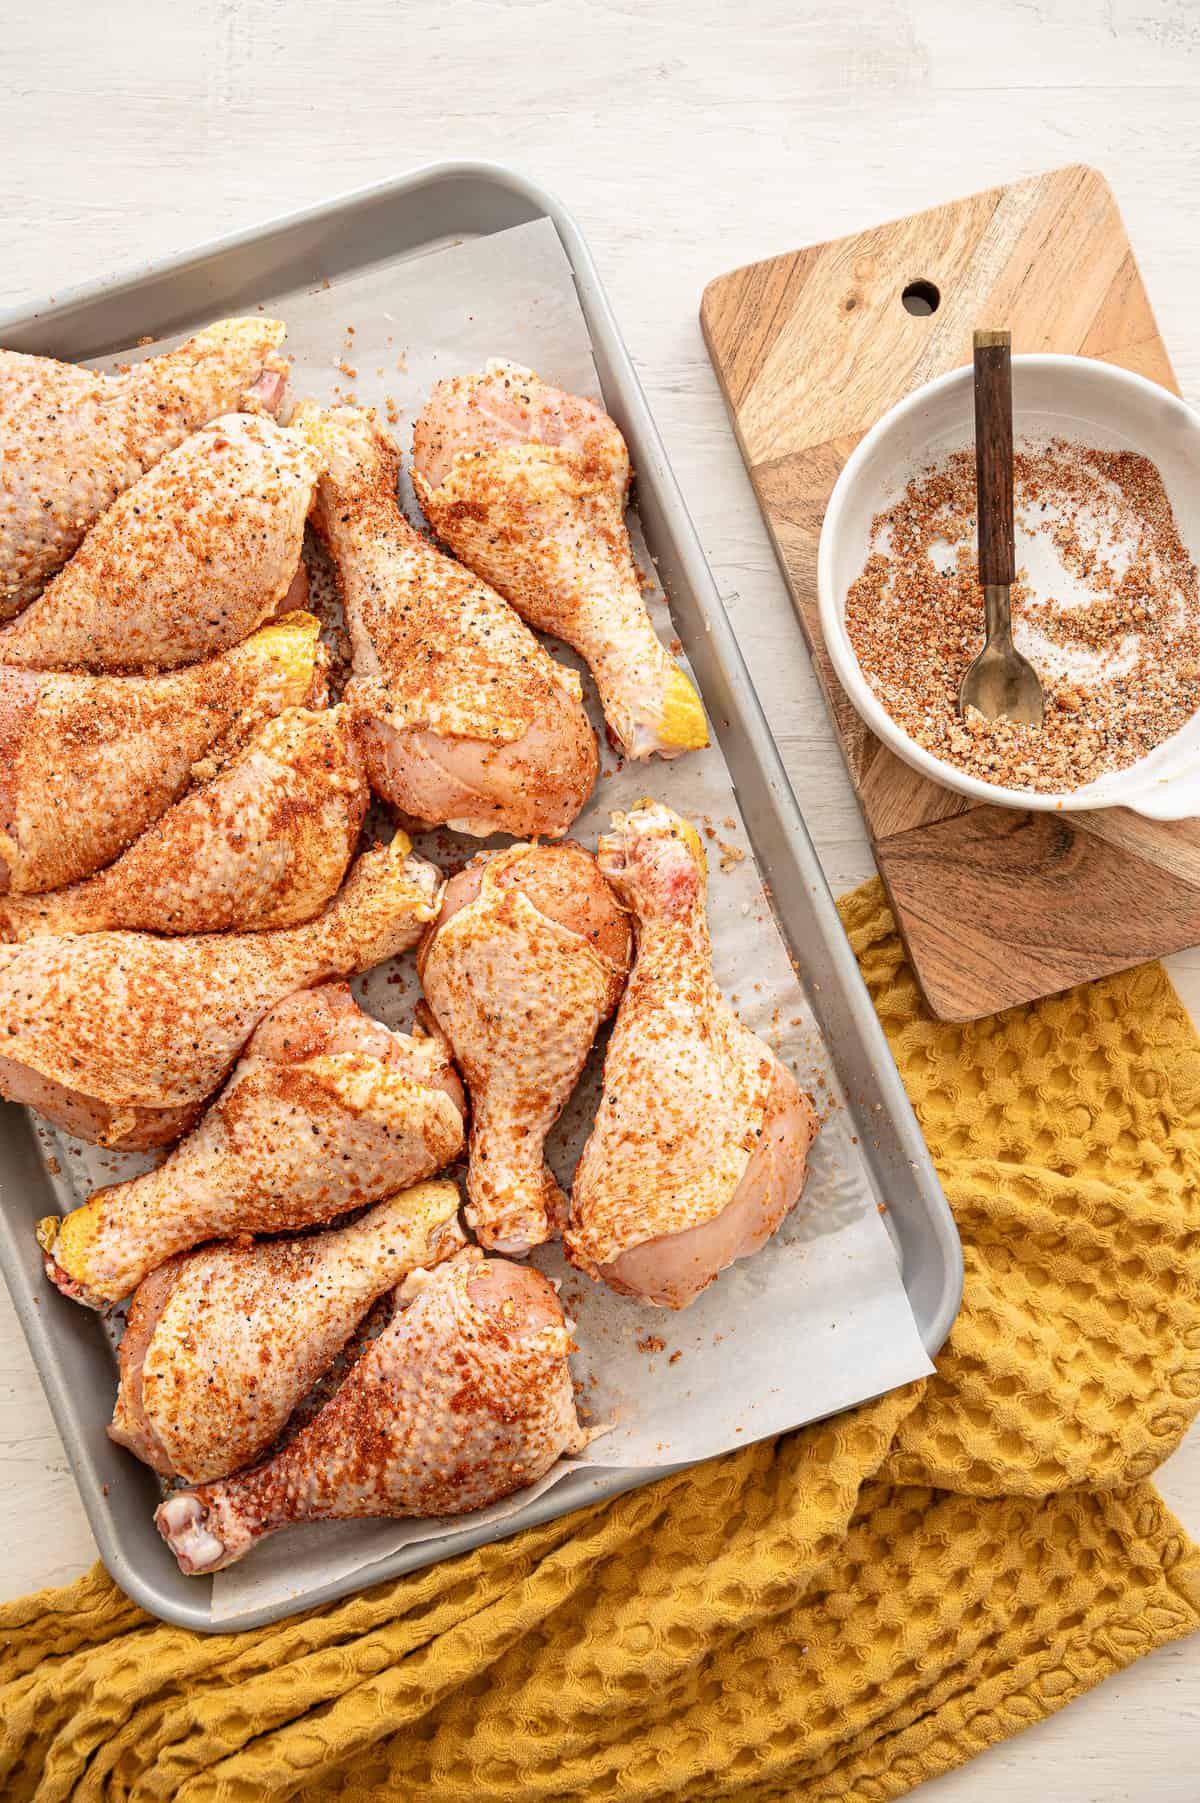 Raw chicken drumsticks with a rub on a baking sheet.